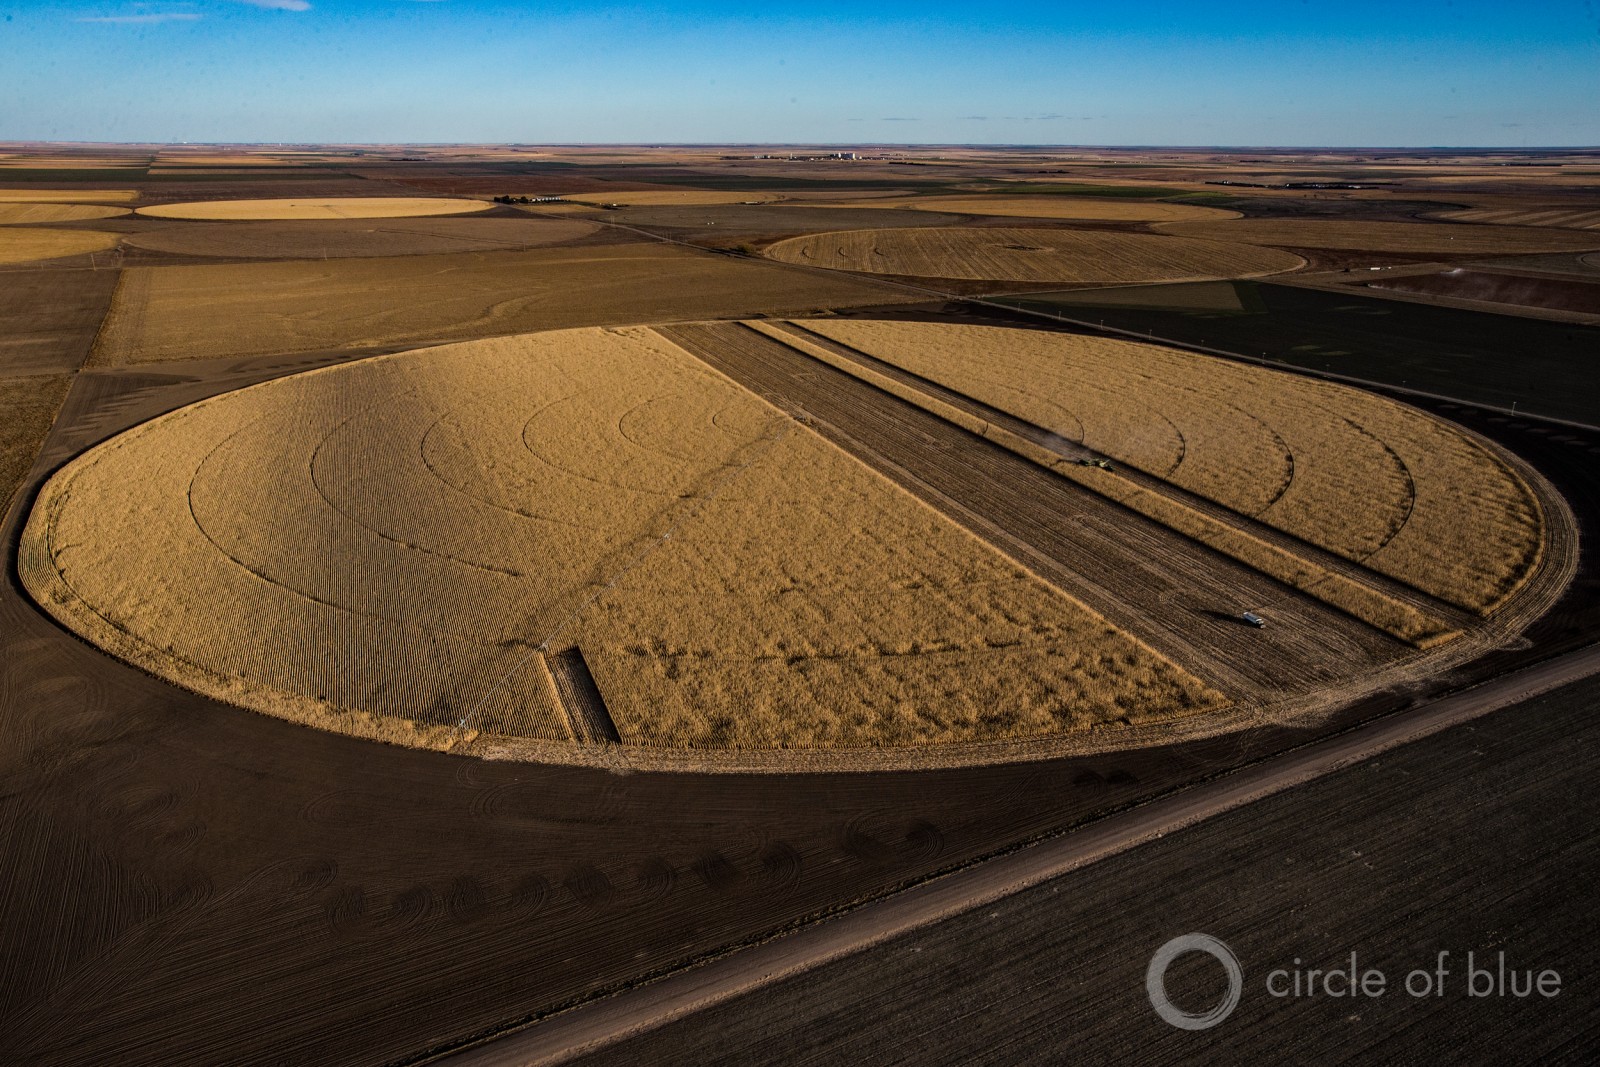 Agriculture consumes most of the world’s fresh water. Here, a corn crop is harvested in the U.S. Great Plains. Photo © Brian Lehmann / Circle of Blue